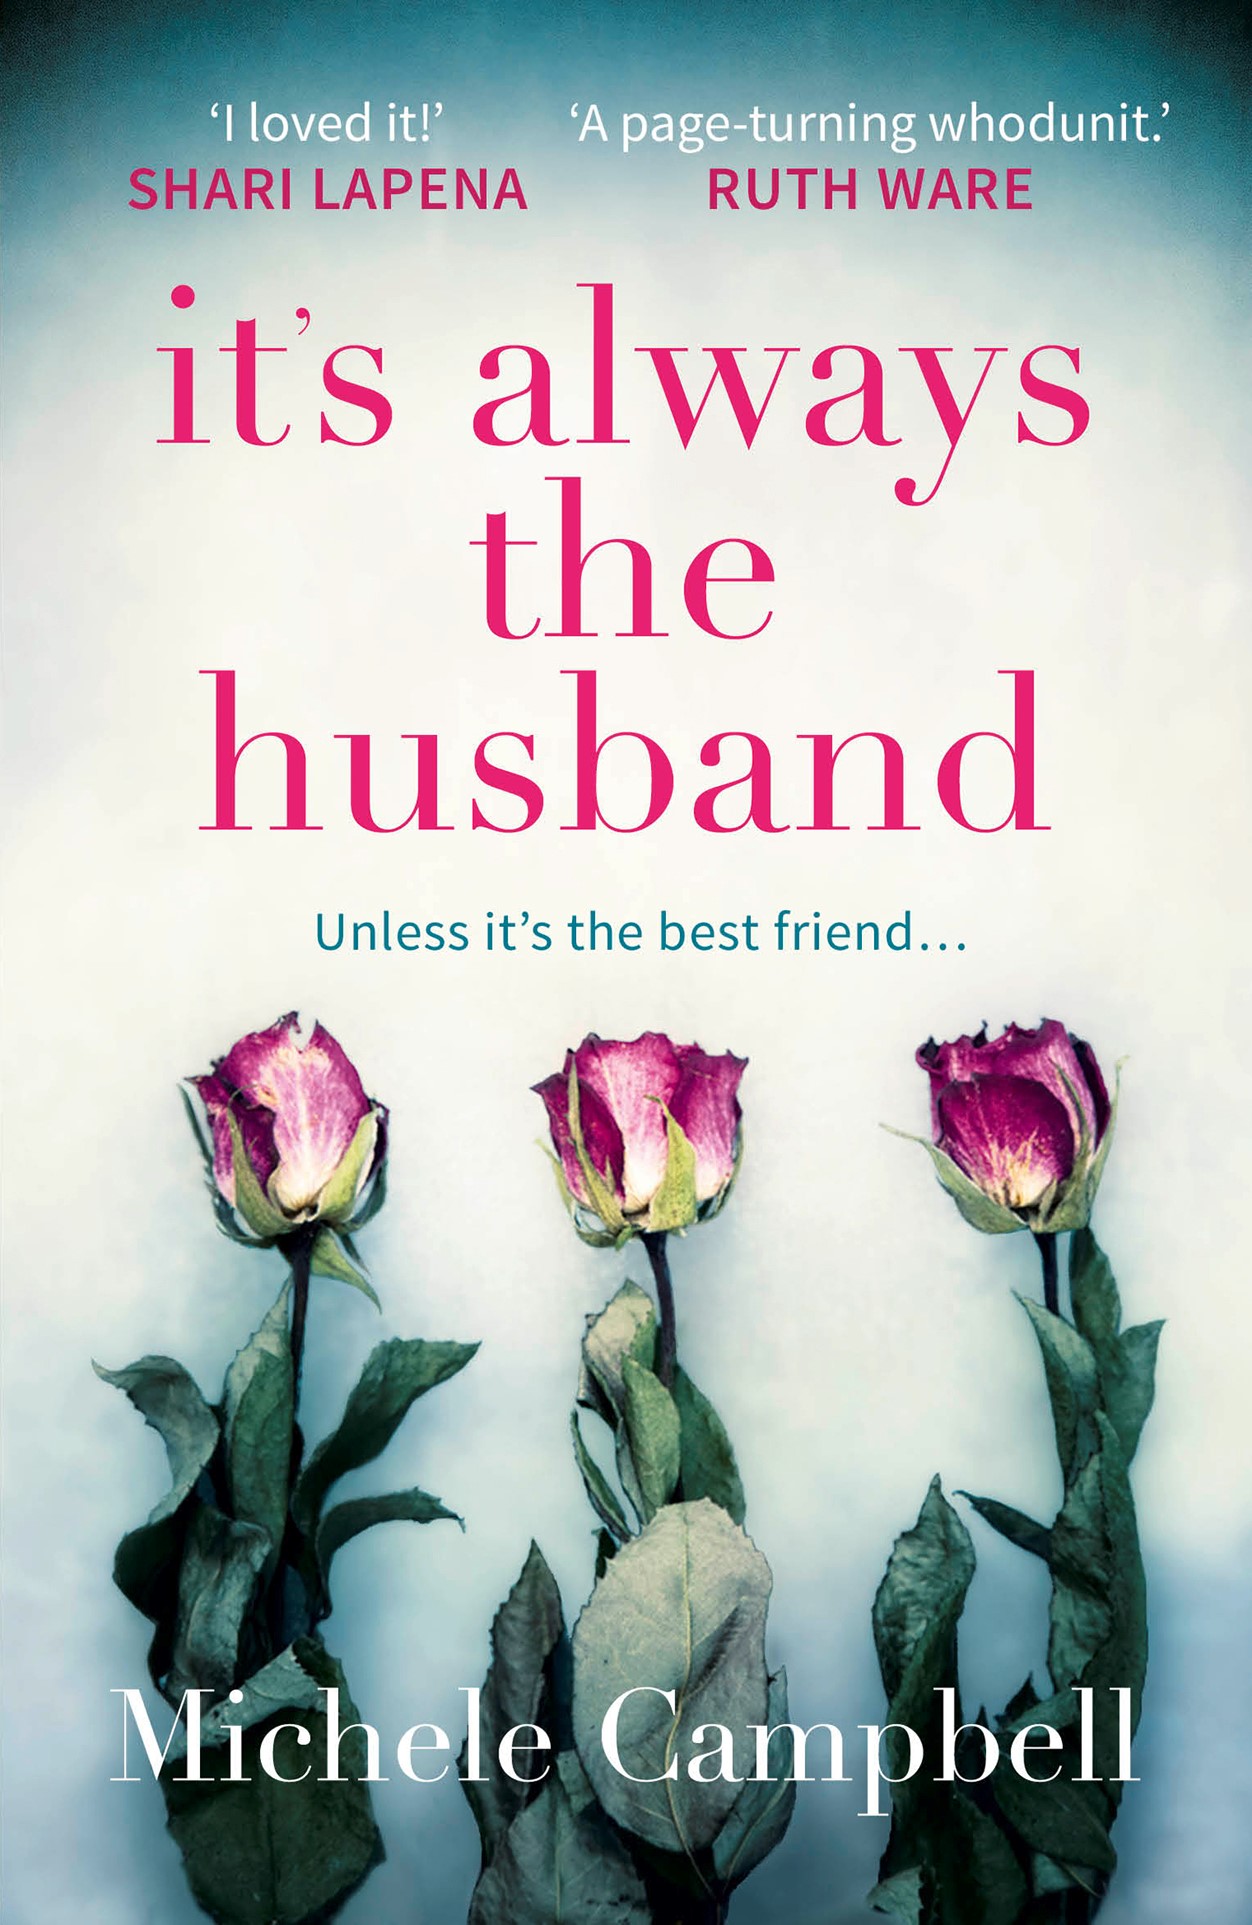 It's Always the Husband, UK Edition hi-res version